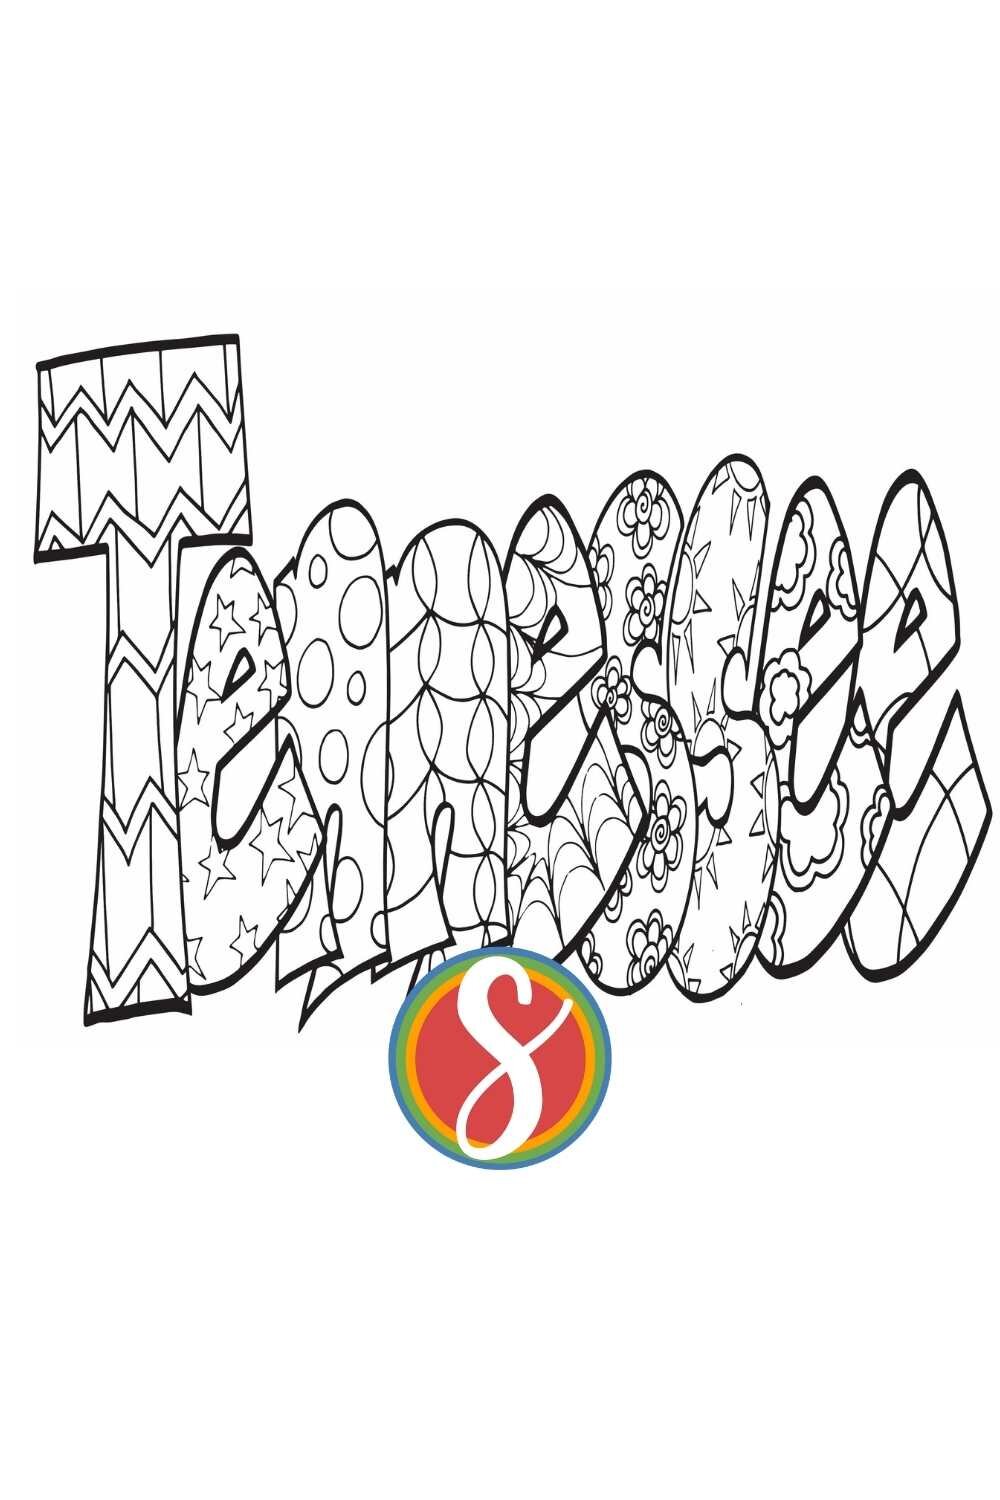 Free printable Tennessee coloring pages from Stevie doodles - 4 free printable sheets to print and color today about your favorite state!